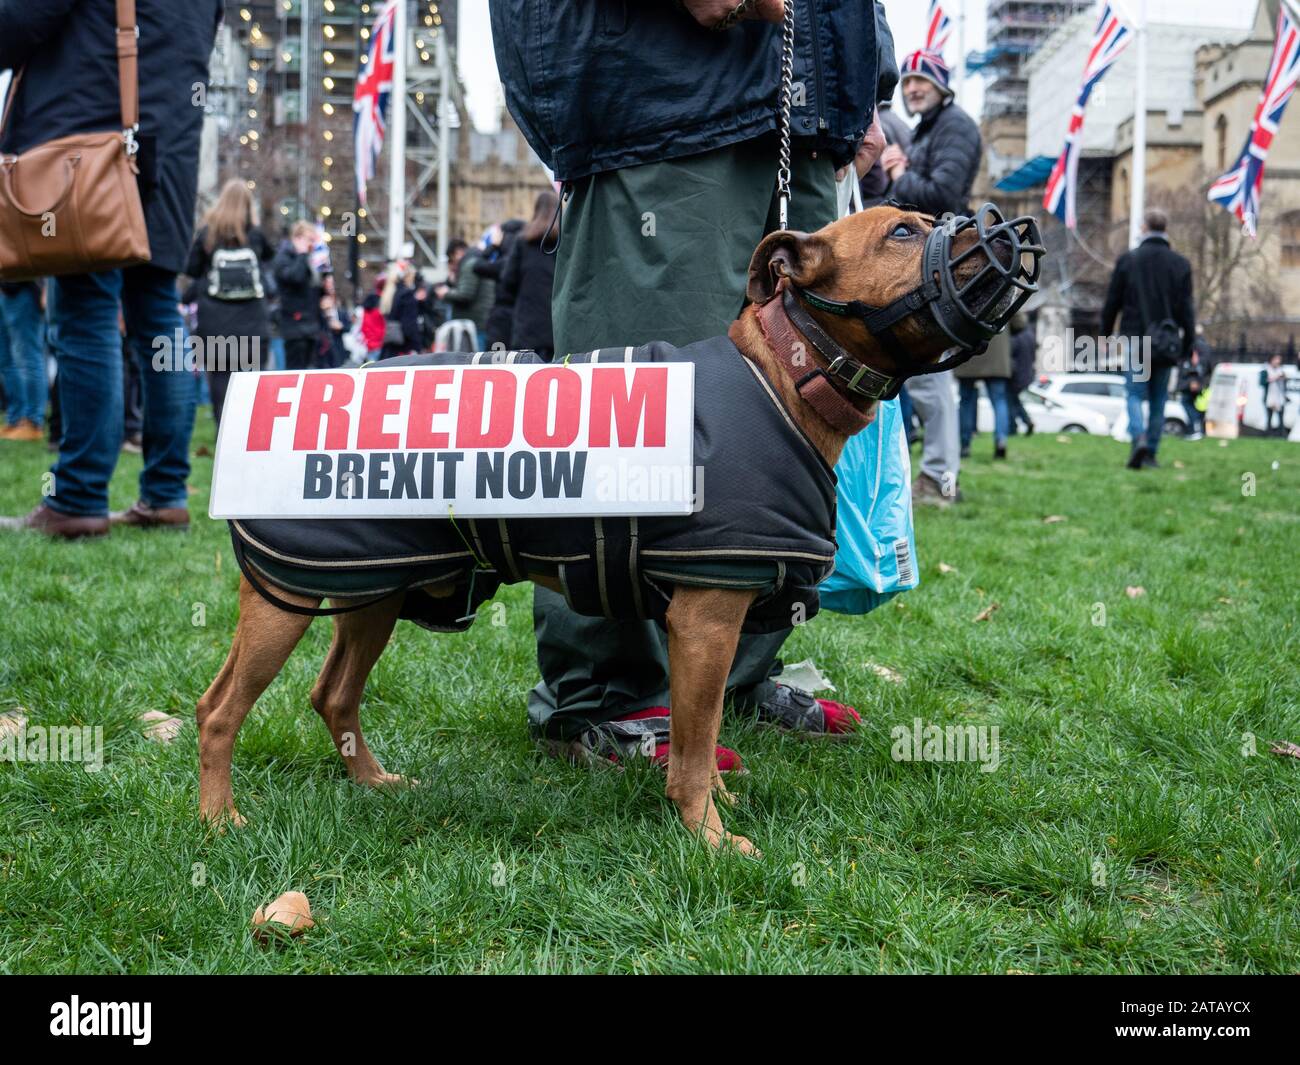 Brexit day 31st Jan 2020 and people congregate in Parliament square, London, England. A muzzled dog stands in the foreground wearing a Brexit slogan. Stock Photo